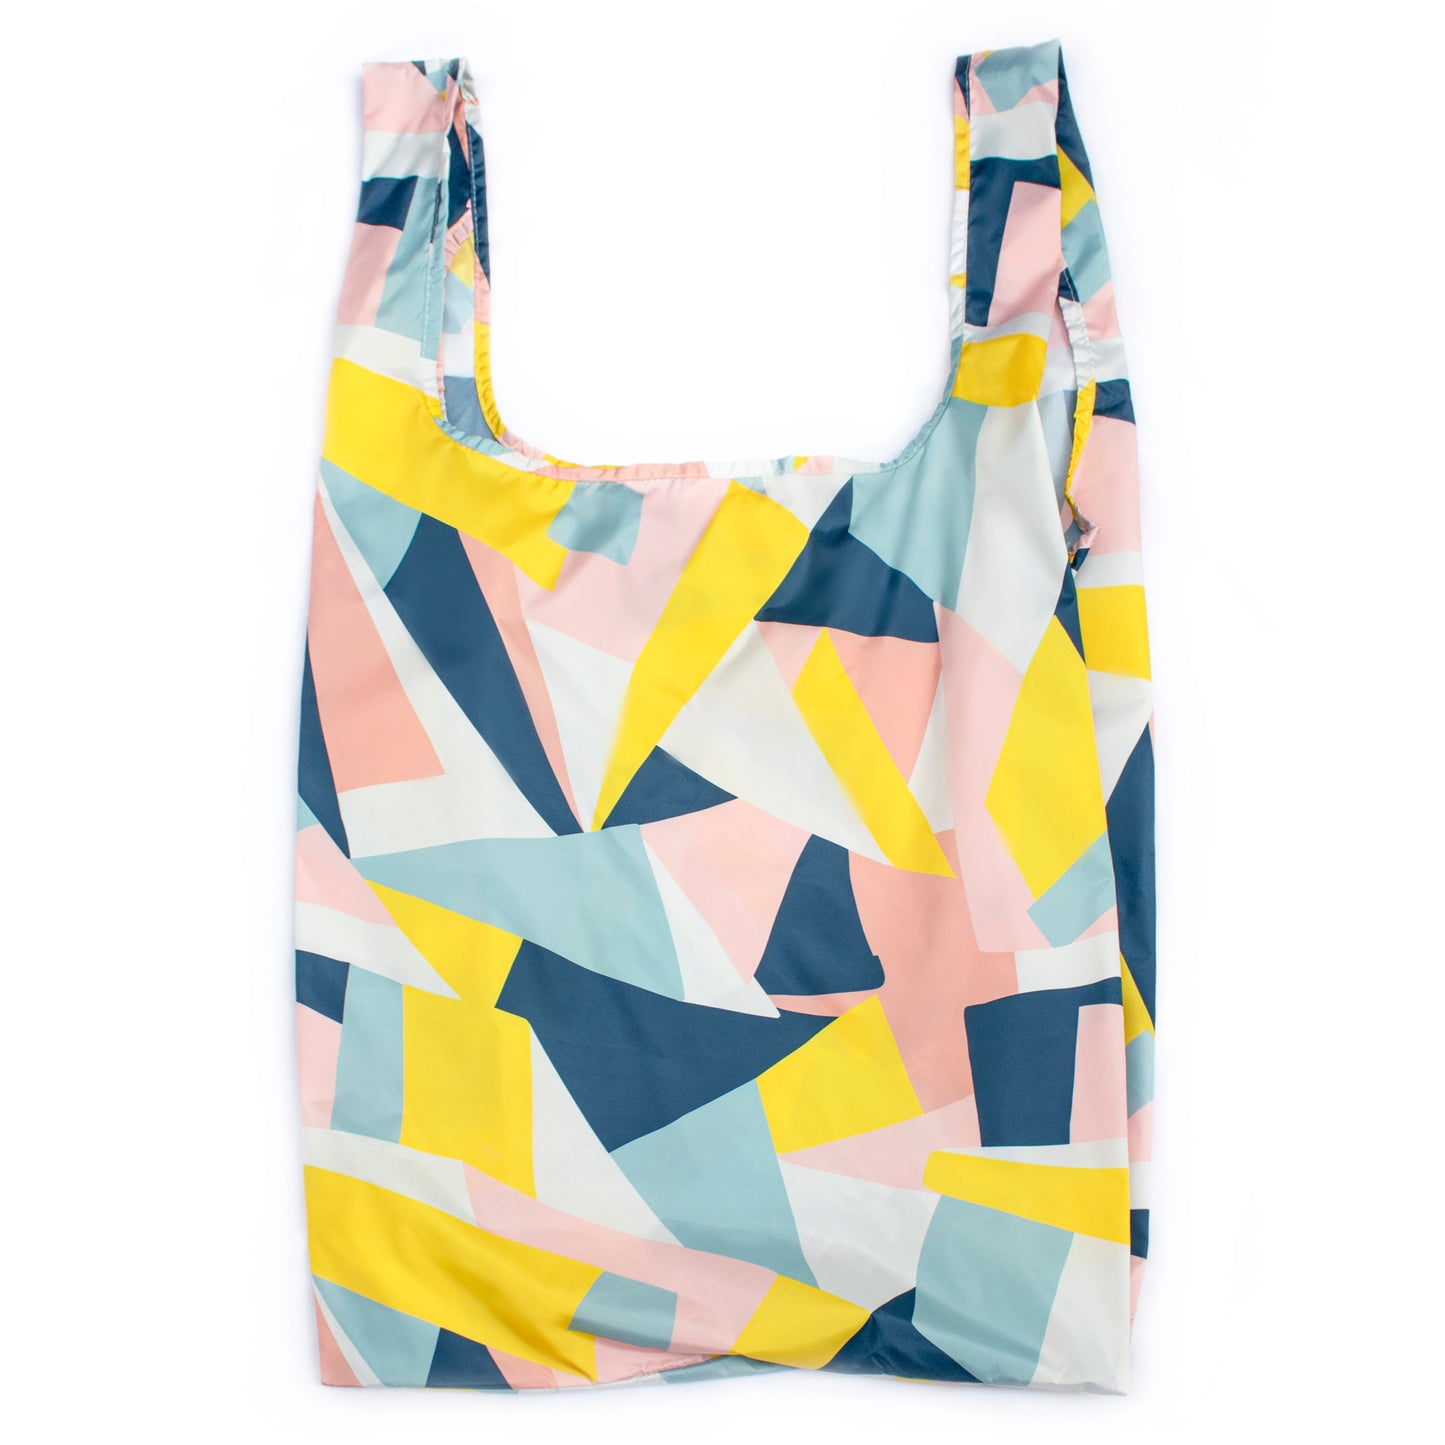 Shopping Bag by Kind